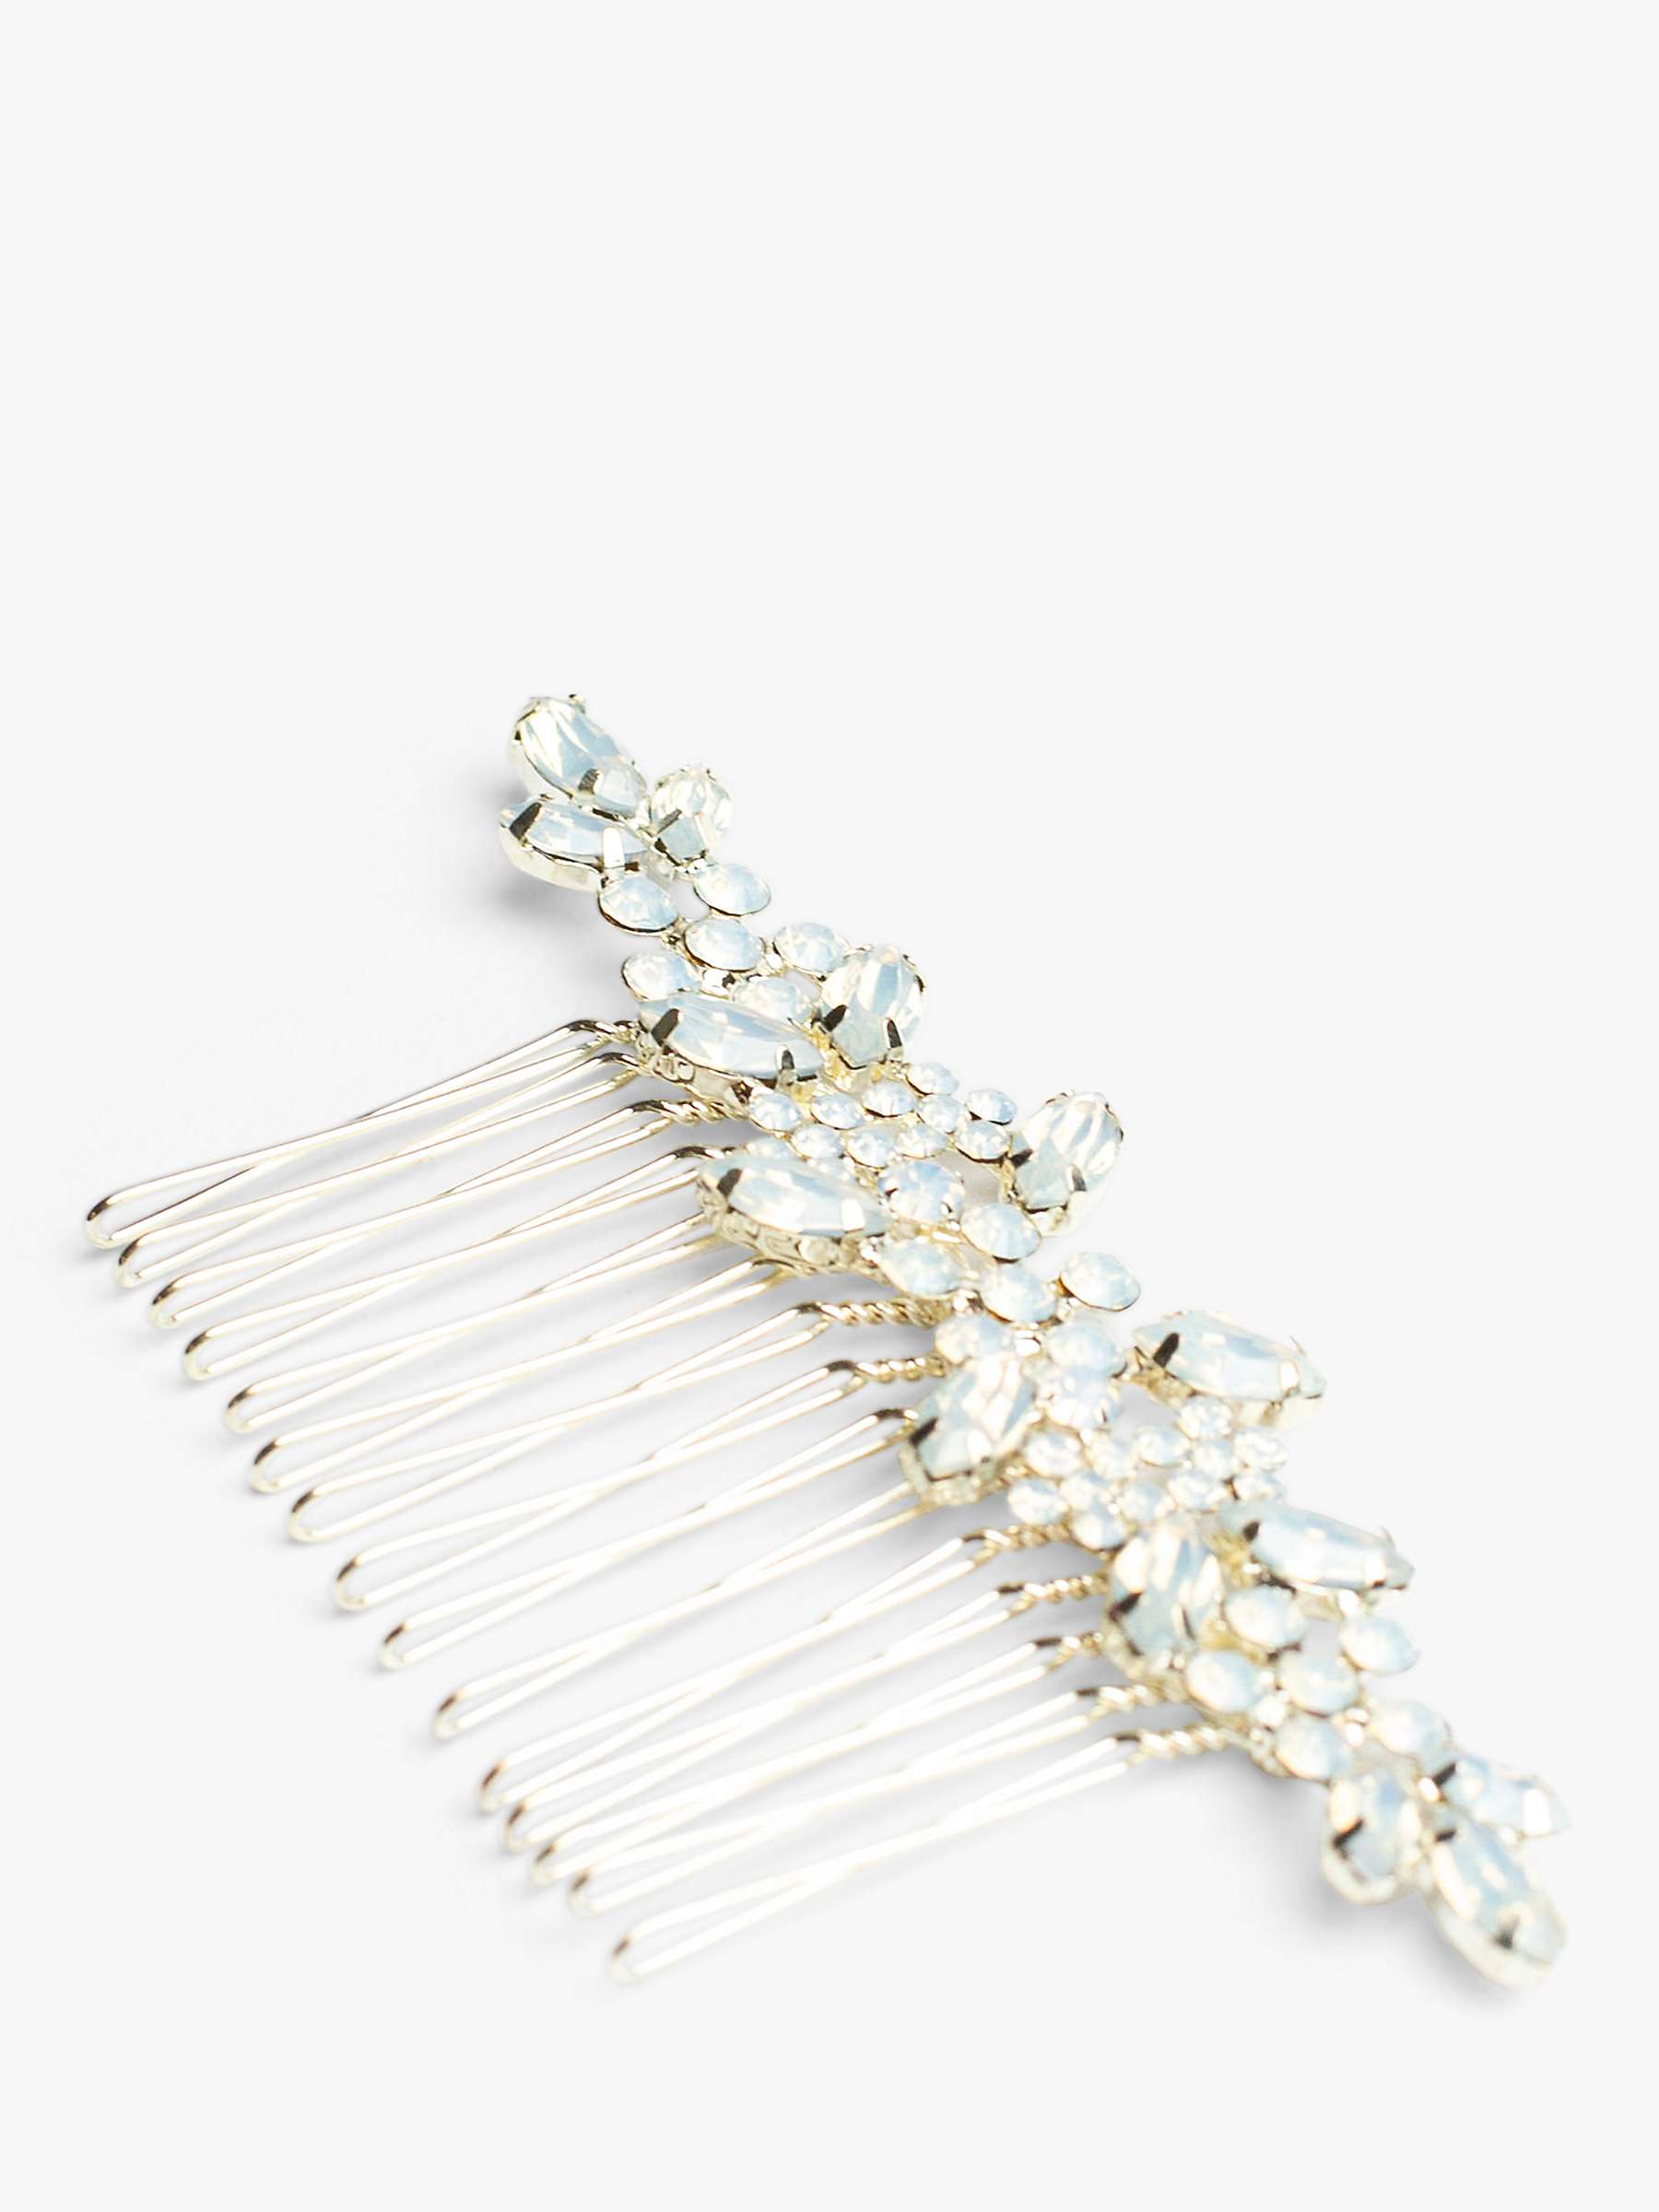 Buy Bloom & Bay Pansy Frosted Stone Hair Comb Grip, Gold/Blue Online at johnlewis.com